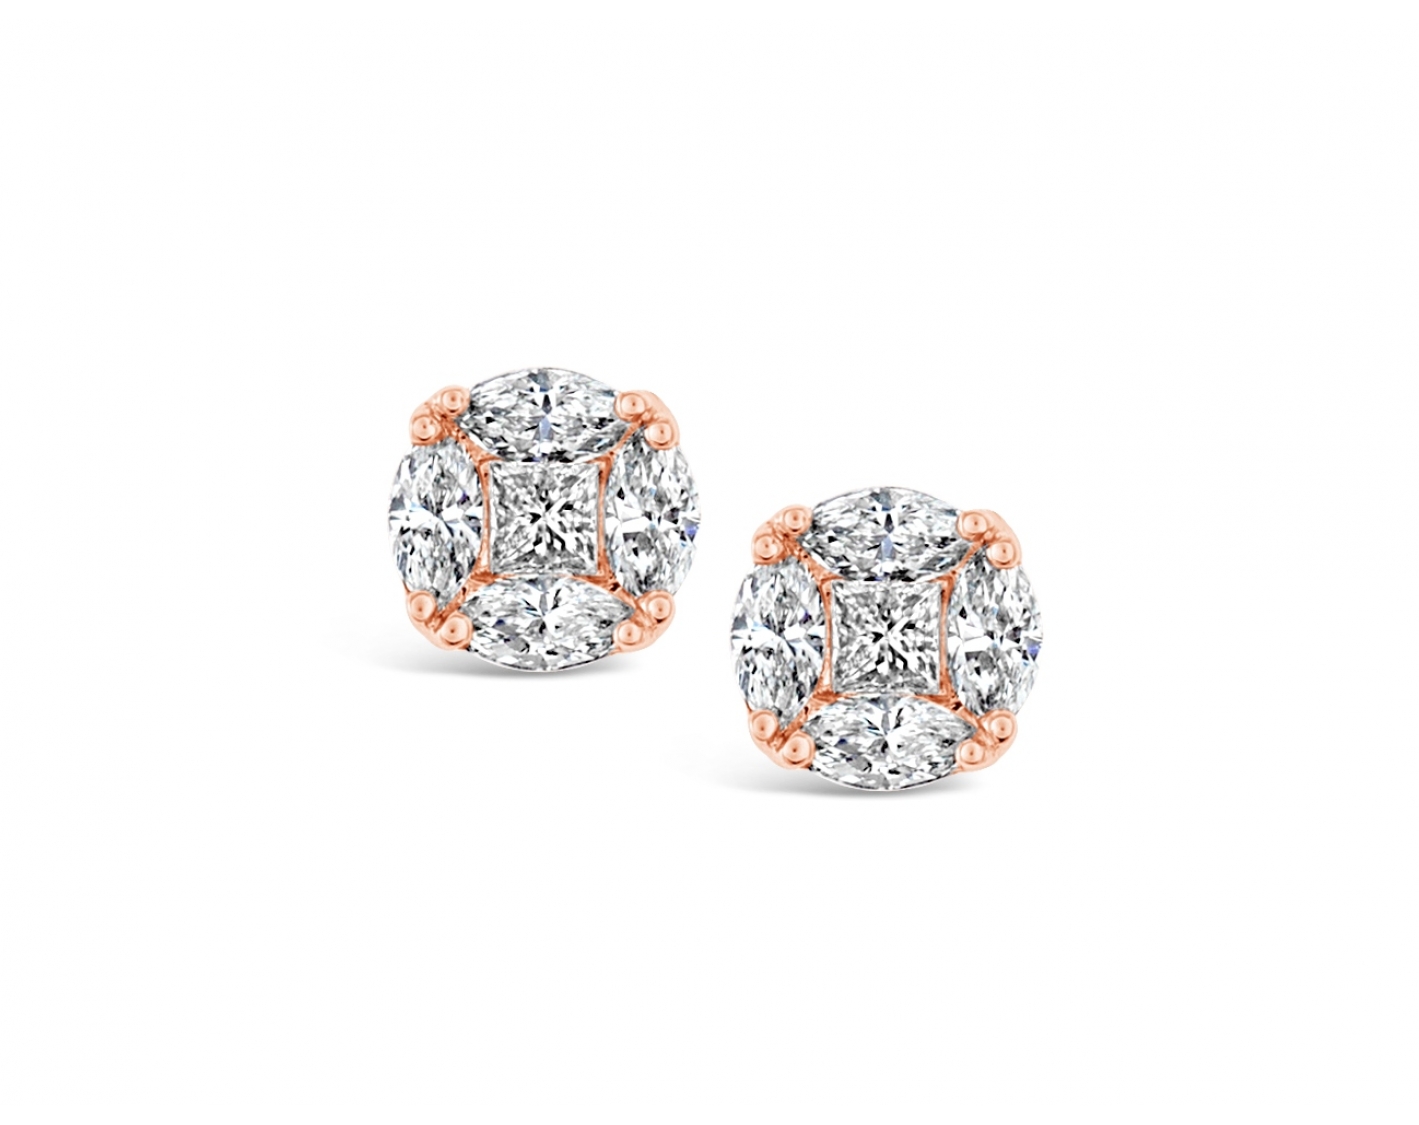 18k rose gold illusion set stud earrings with princess & marquises diamonds Photos & images